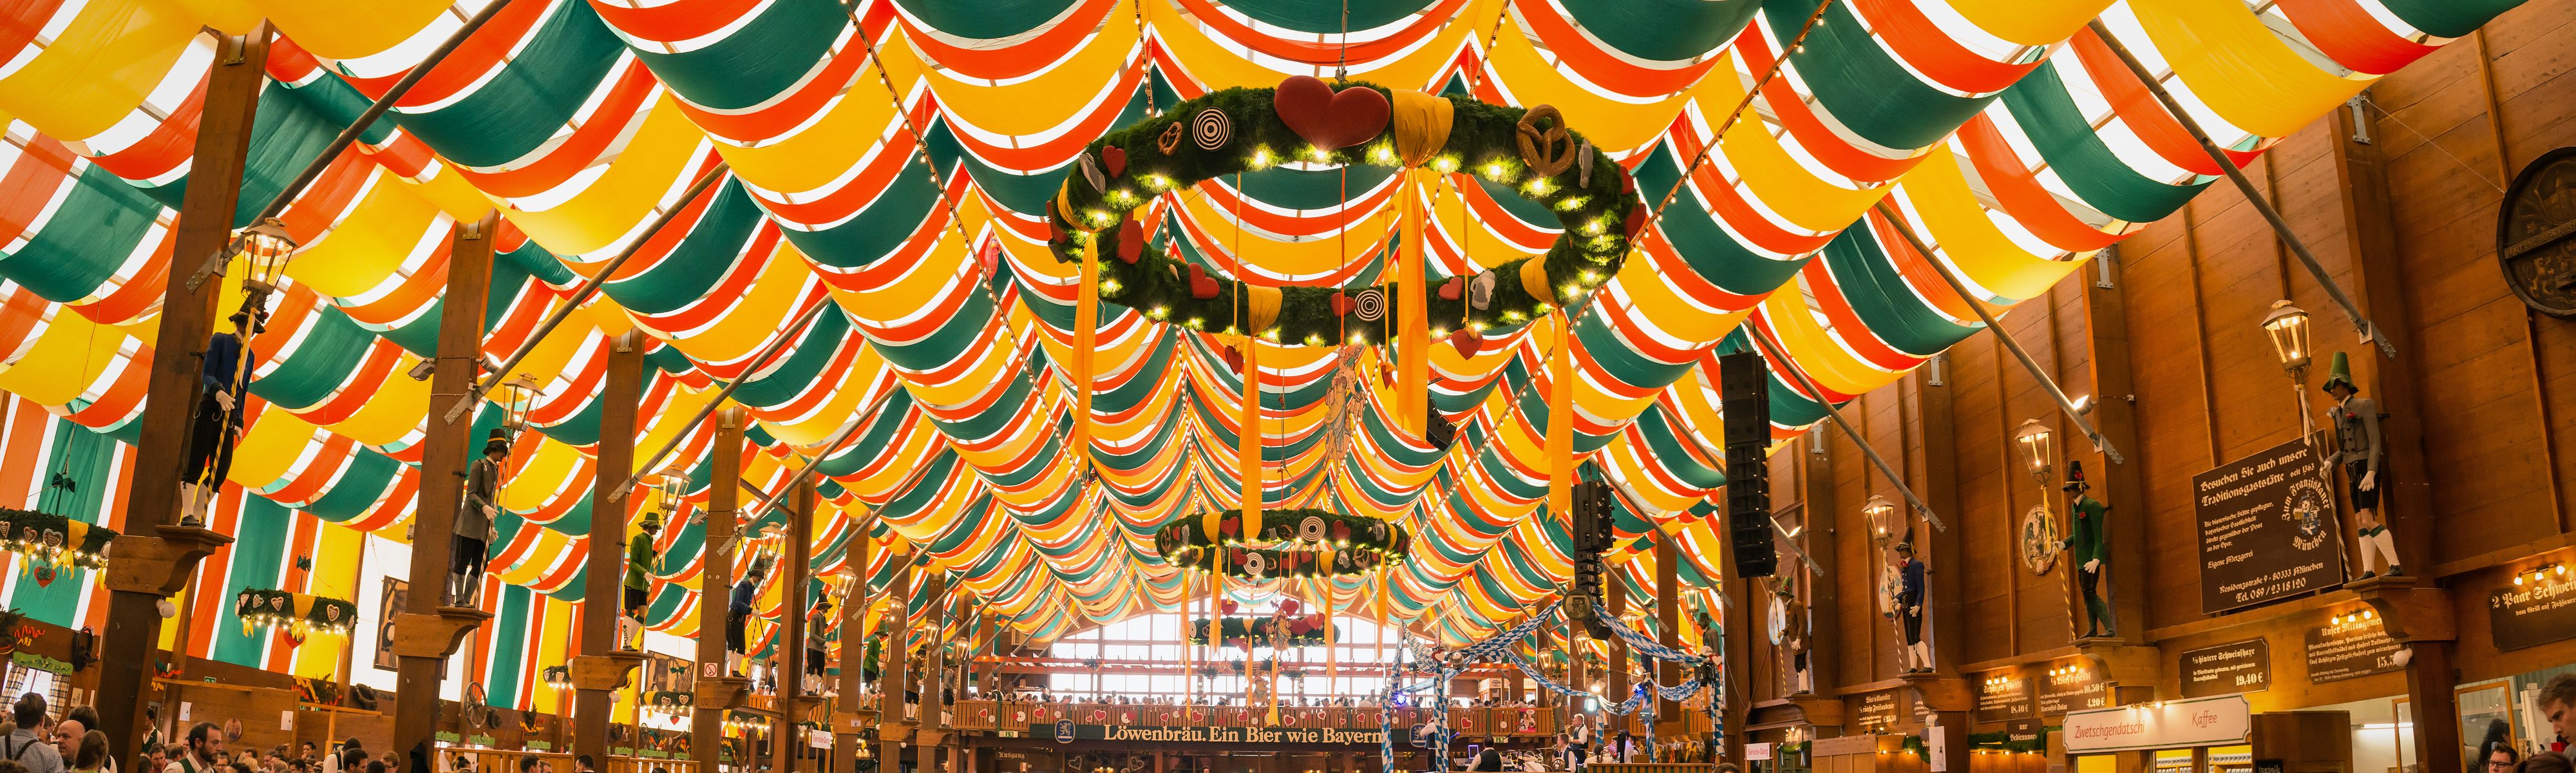 green yellow and red tent in oktoberfest hall in germany